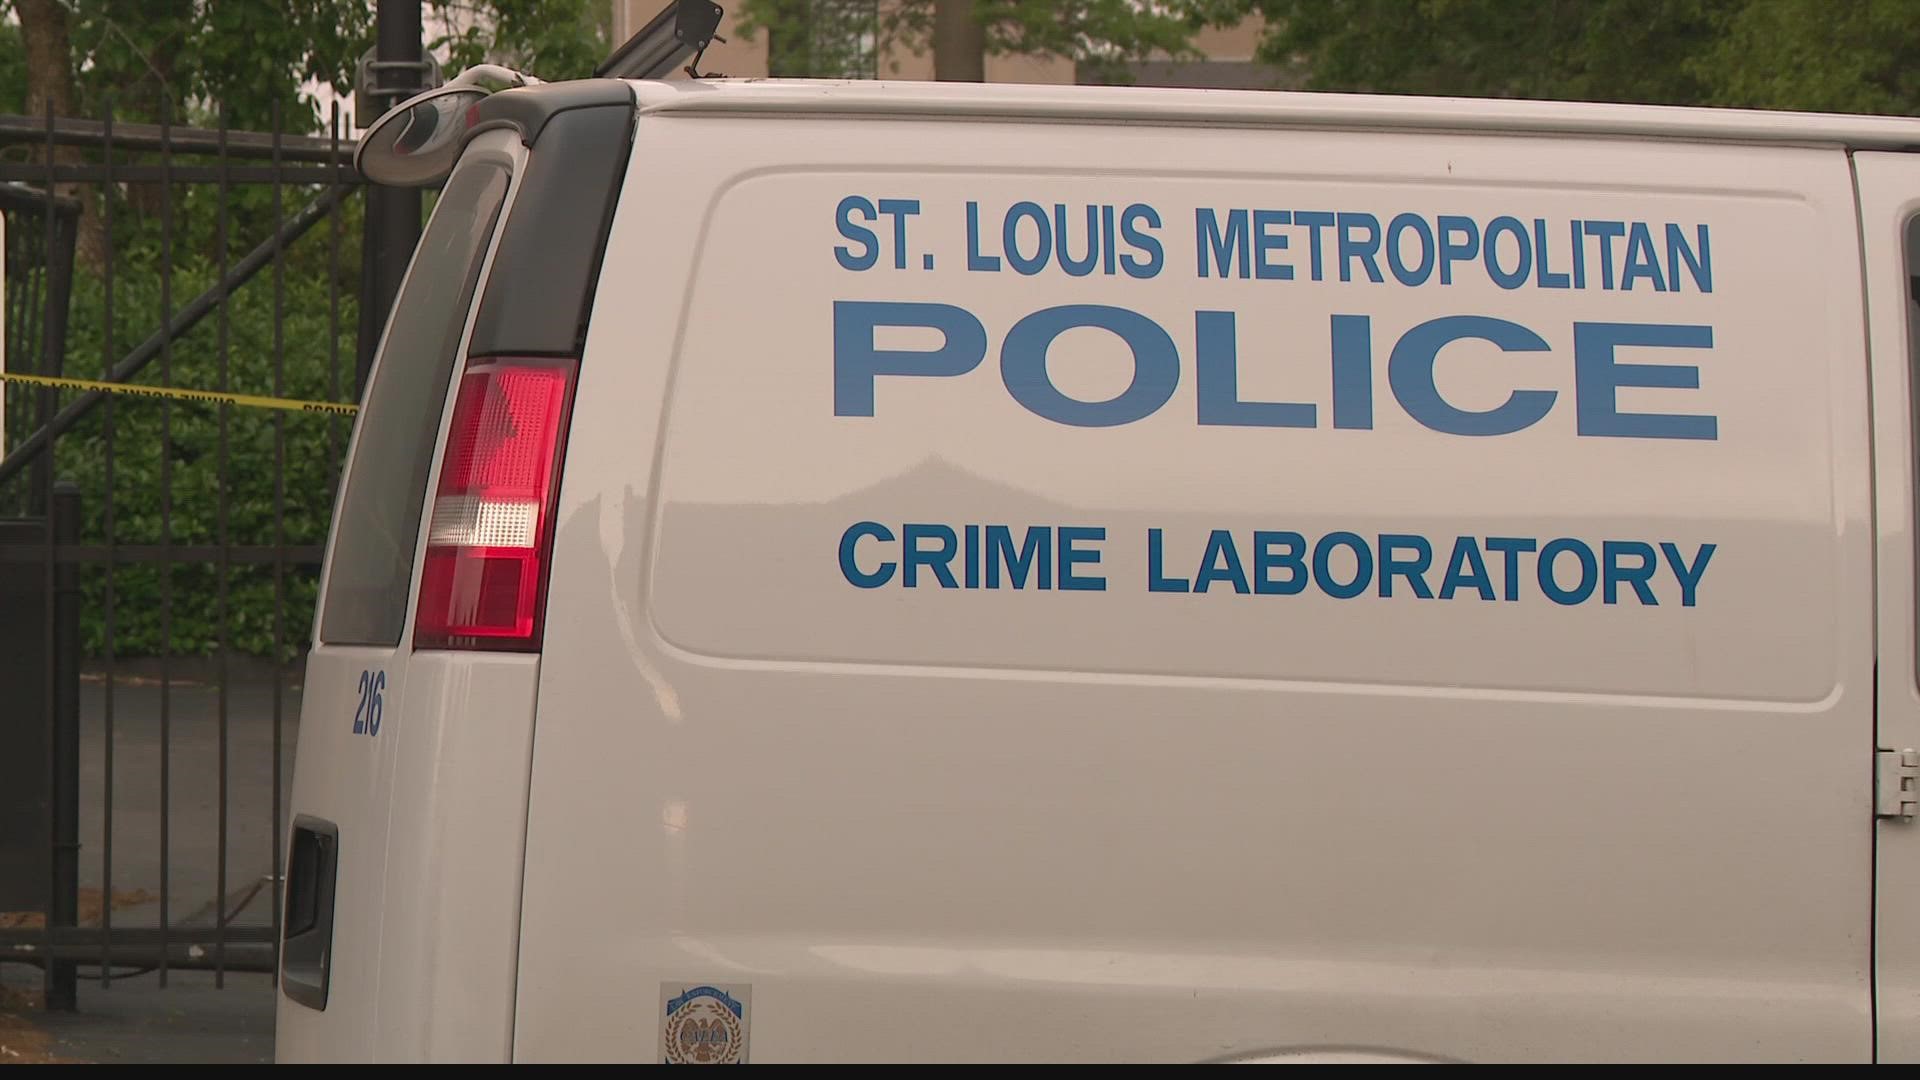 On Mother's Day alone there were 7 shootings. Two of the shootings were deadly. There were 15 shootings in St. Louis over the weekend.